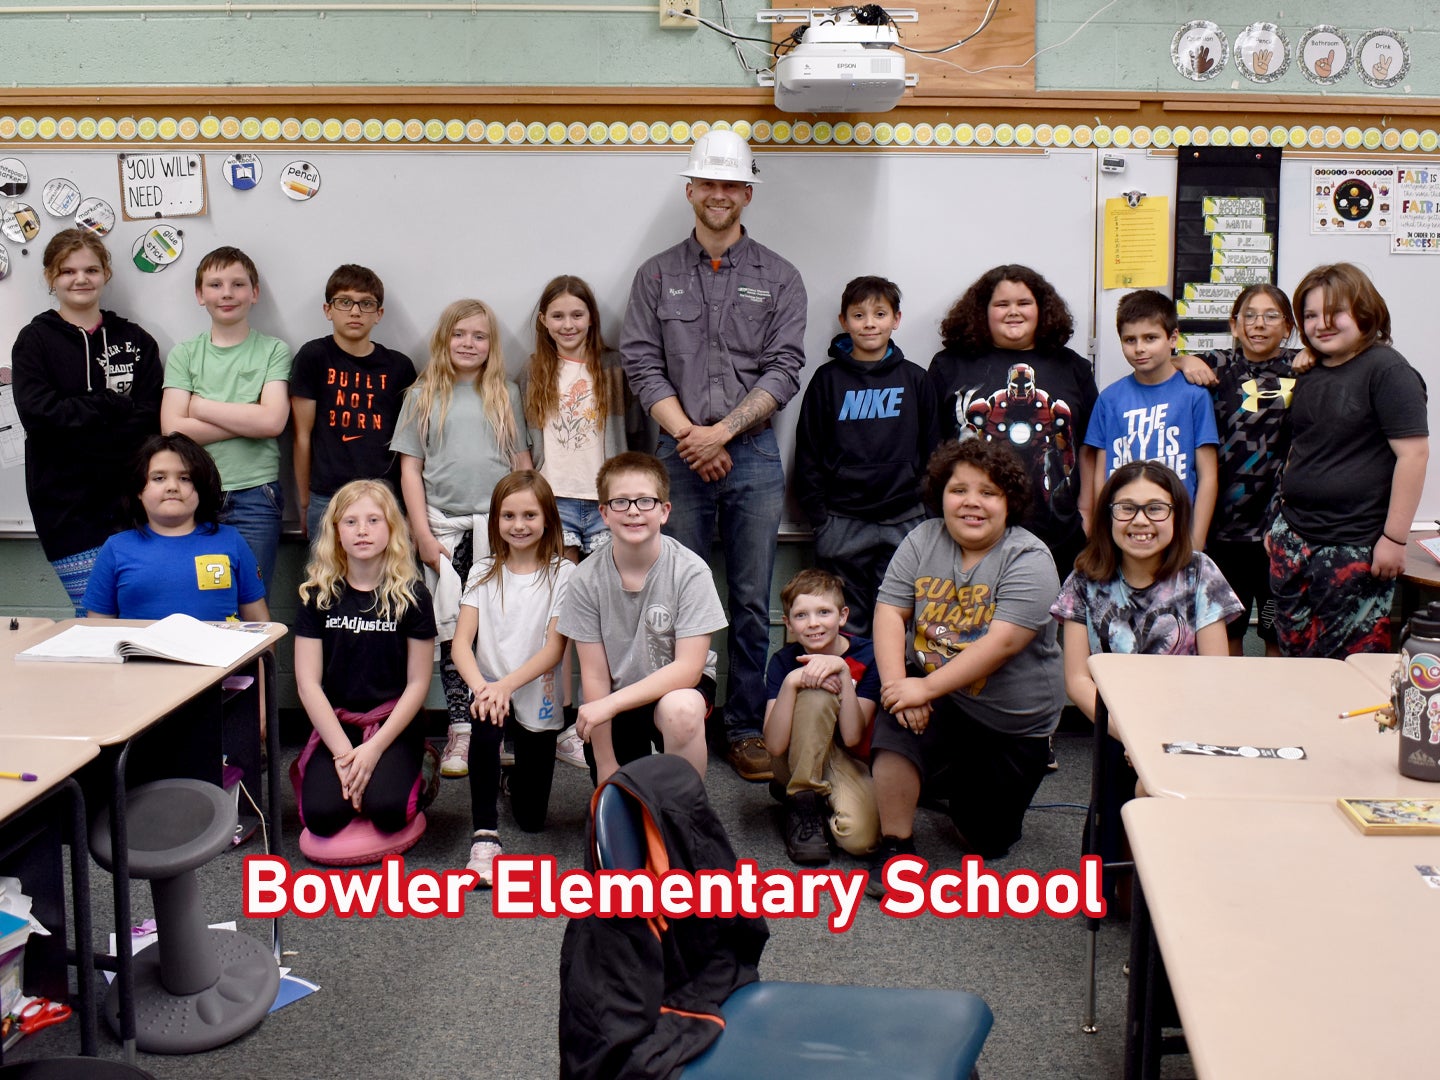 CWEC lineman Wyatt Phillips with the Bowler Elementary School 4th grade class